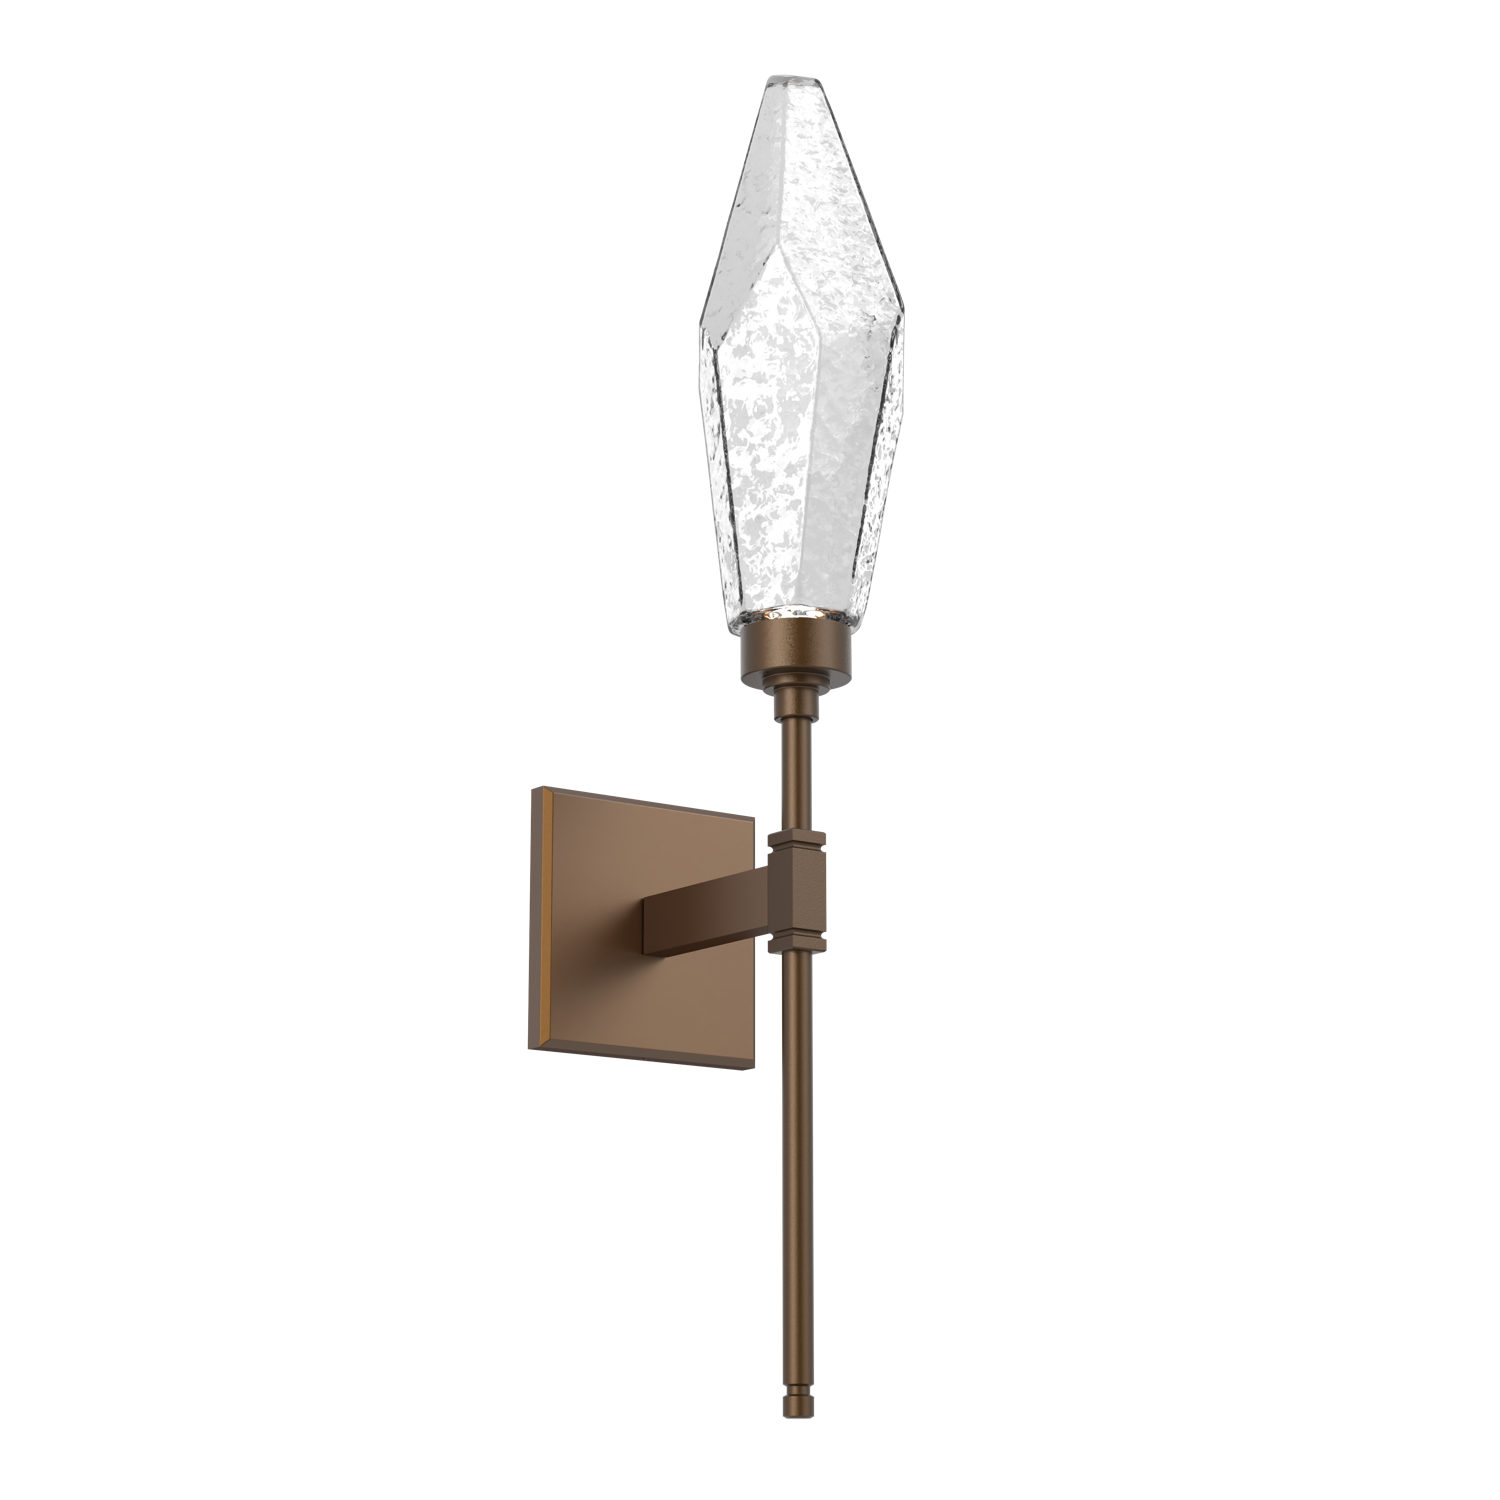 IDB0050-07-FB-CC-Hammerton-Studio-Rock-Crystal-belvedere-wall-sconce-with-flat-bronze-finish-and-clear-glass-shades-and-LED-lamping